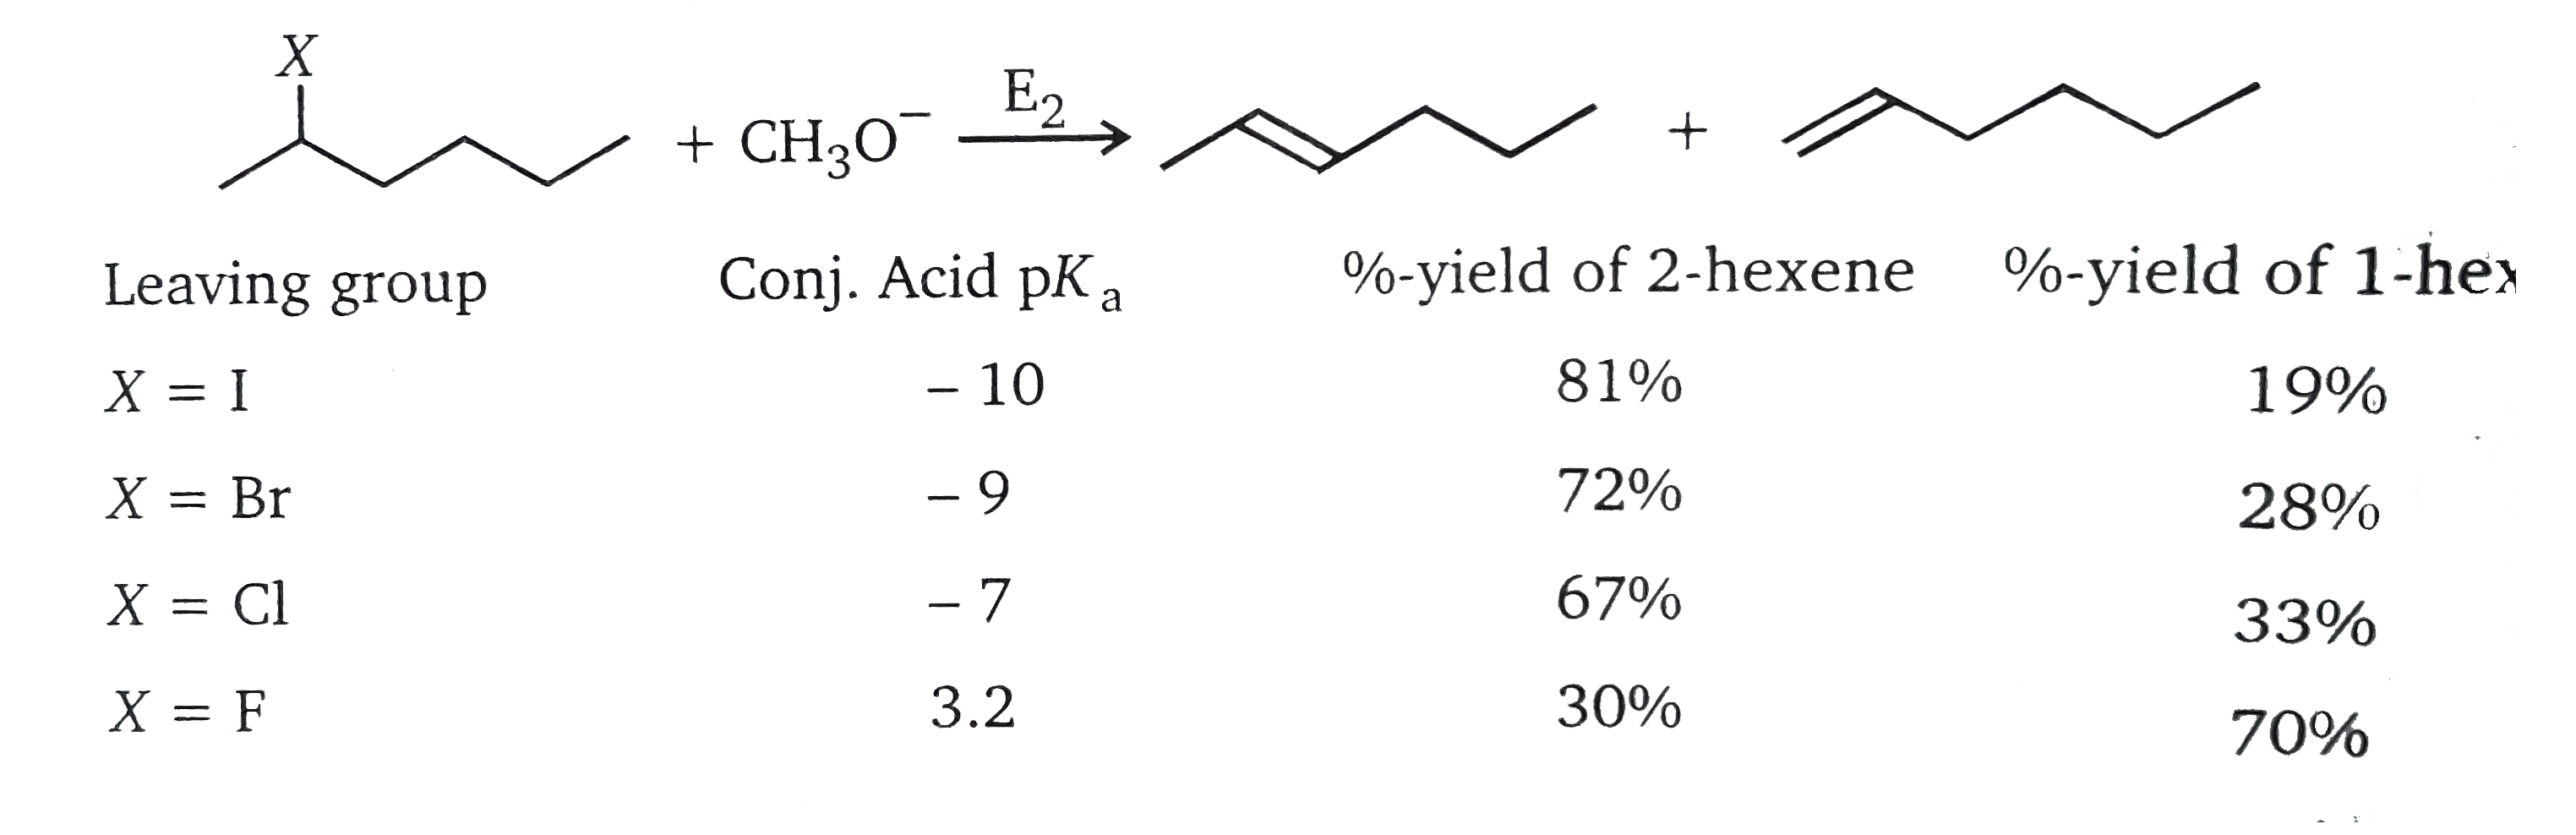 The following bimolecular eleimination reaction (E(2))is carried out with different halogen leaving groups the cent yield of the two product (2-hexene and 1-hexene ) for each leacing group is lested below .     which of the following statement is (are) true concerning this seris of  E(2) reaction ?